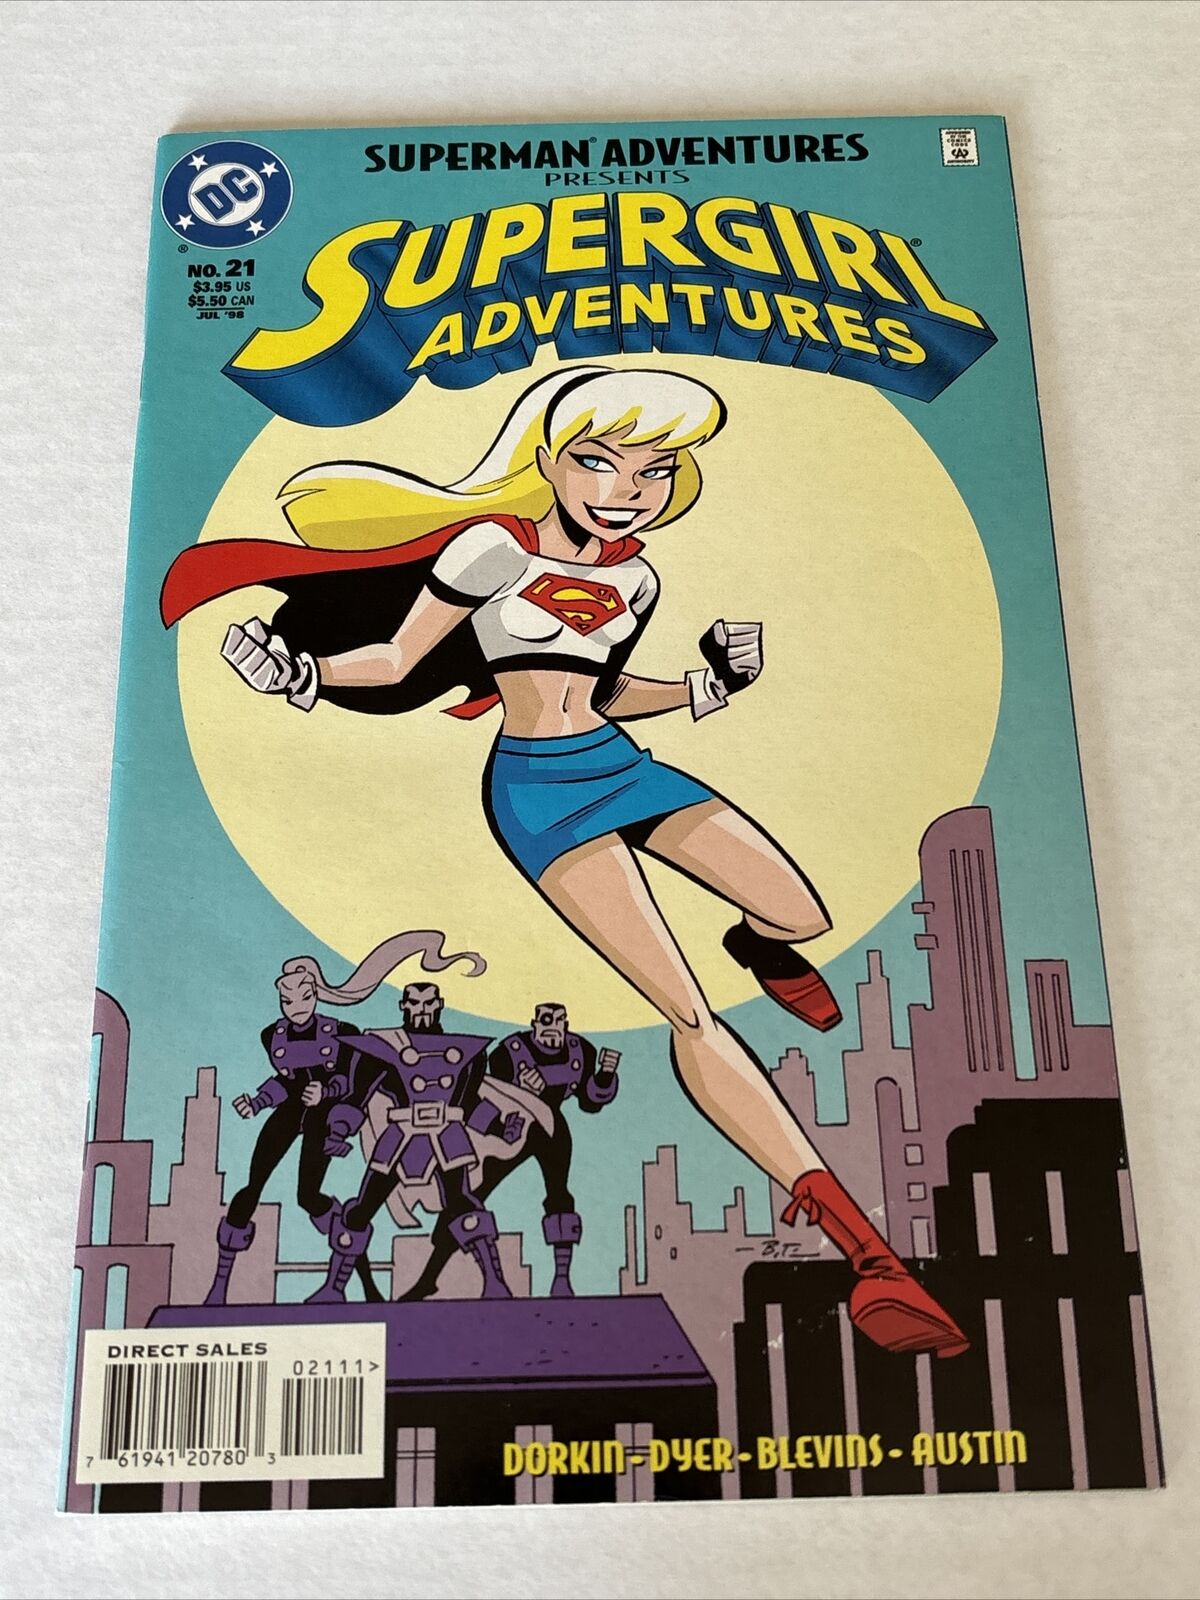 Superman Adventures #21 July 1998 First animated Supergirl